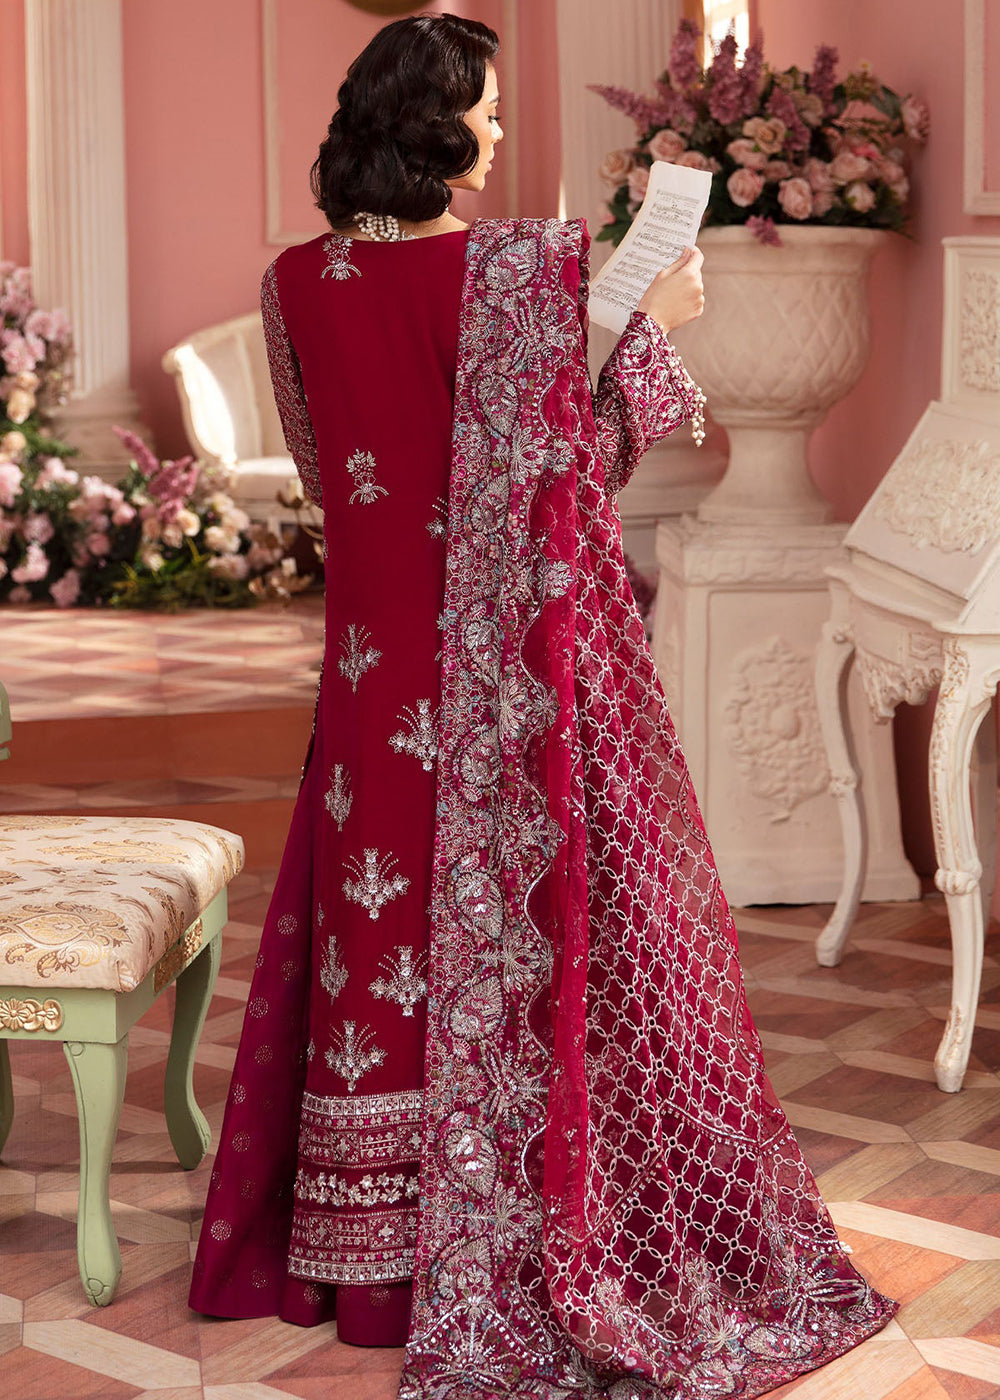 Buy Now The Secret Garden Luxury Unstitched Formals '24 by Nureh | CHARLOTTE Online at Empress Online in USA, UK, Canada & Worldwide at Empress Clothing.